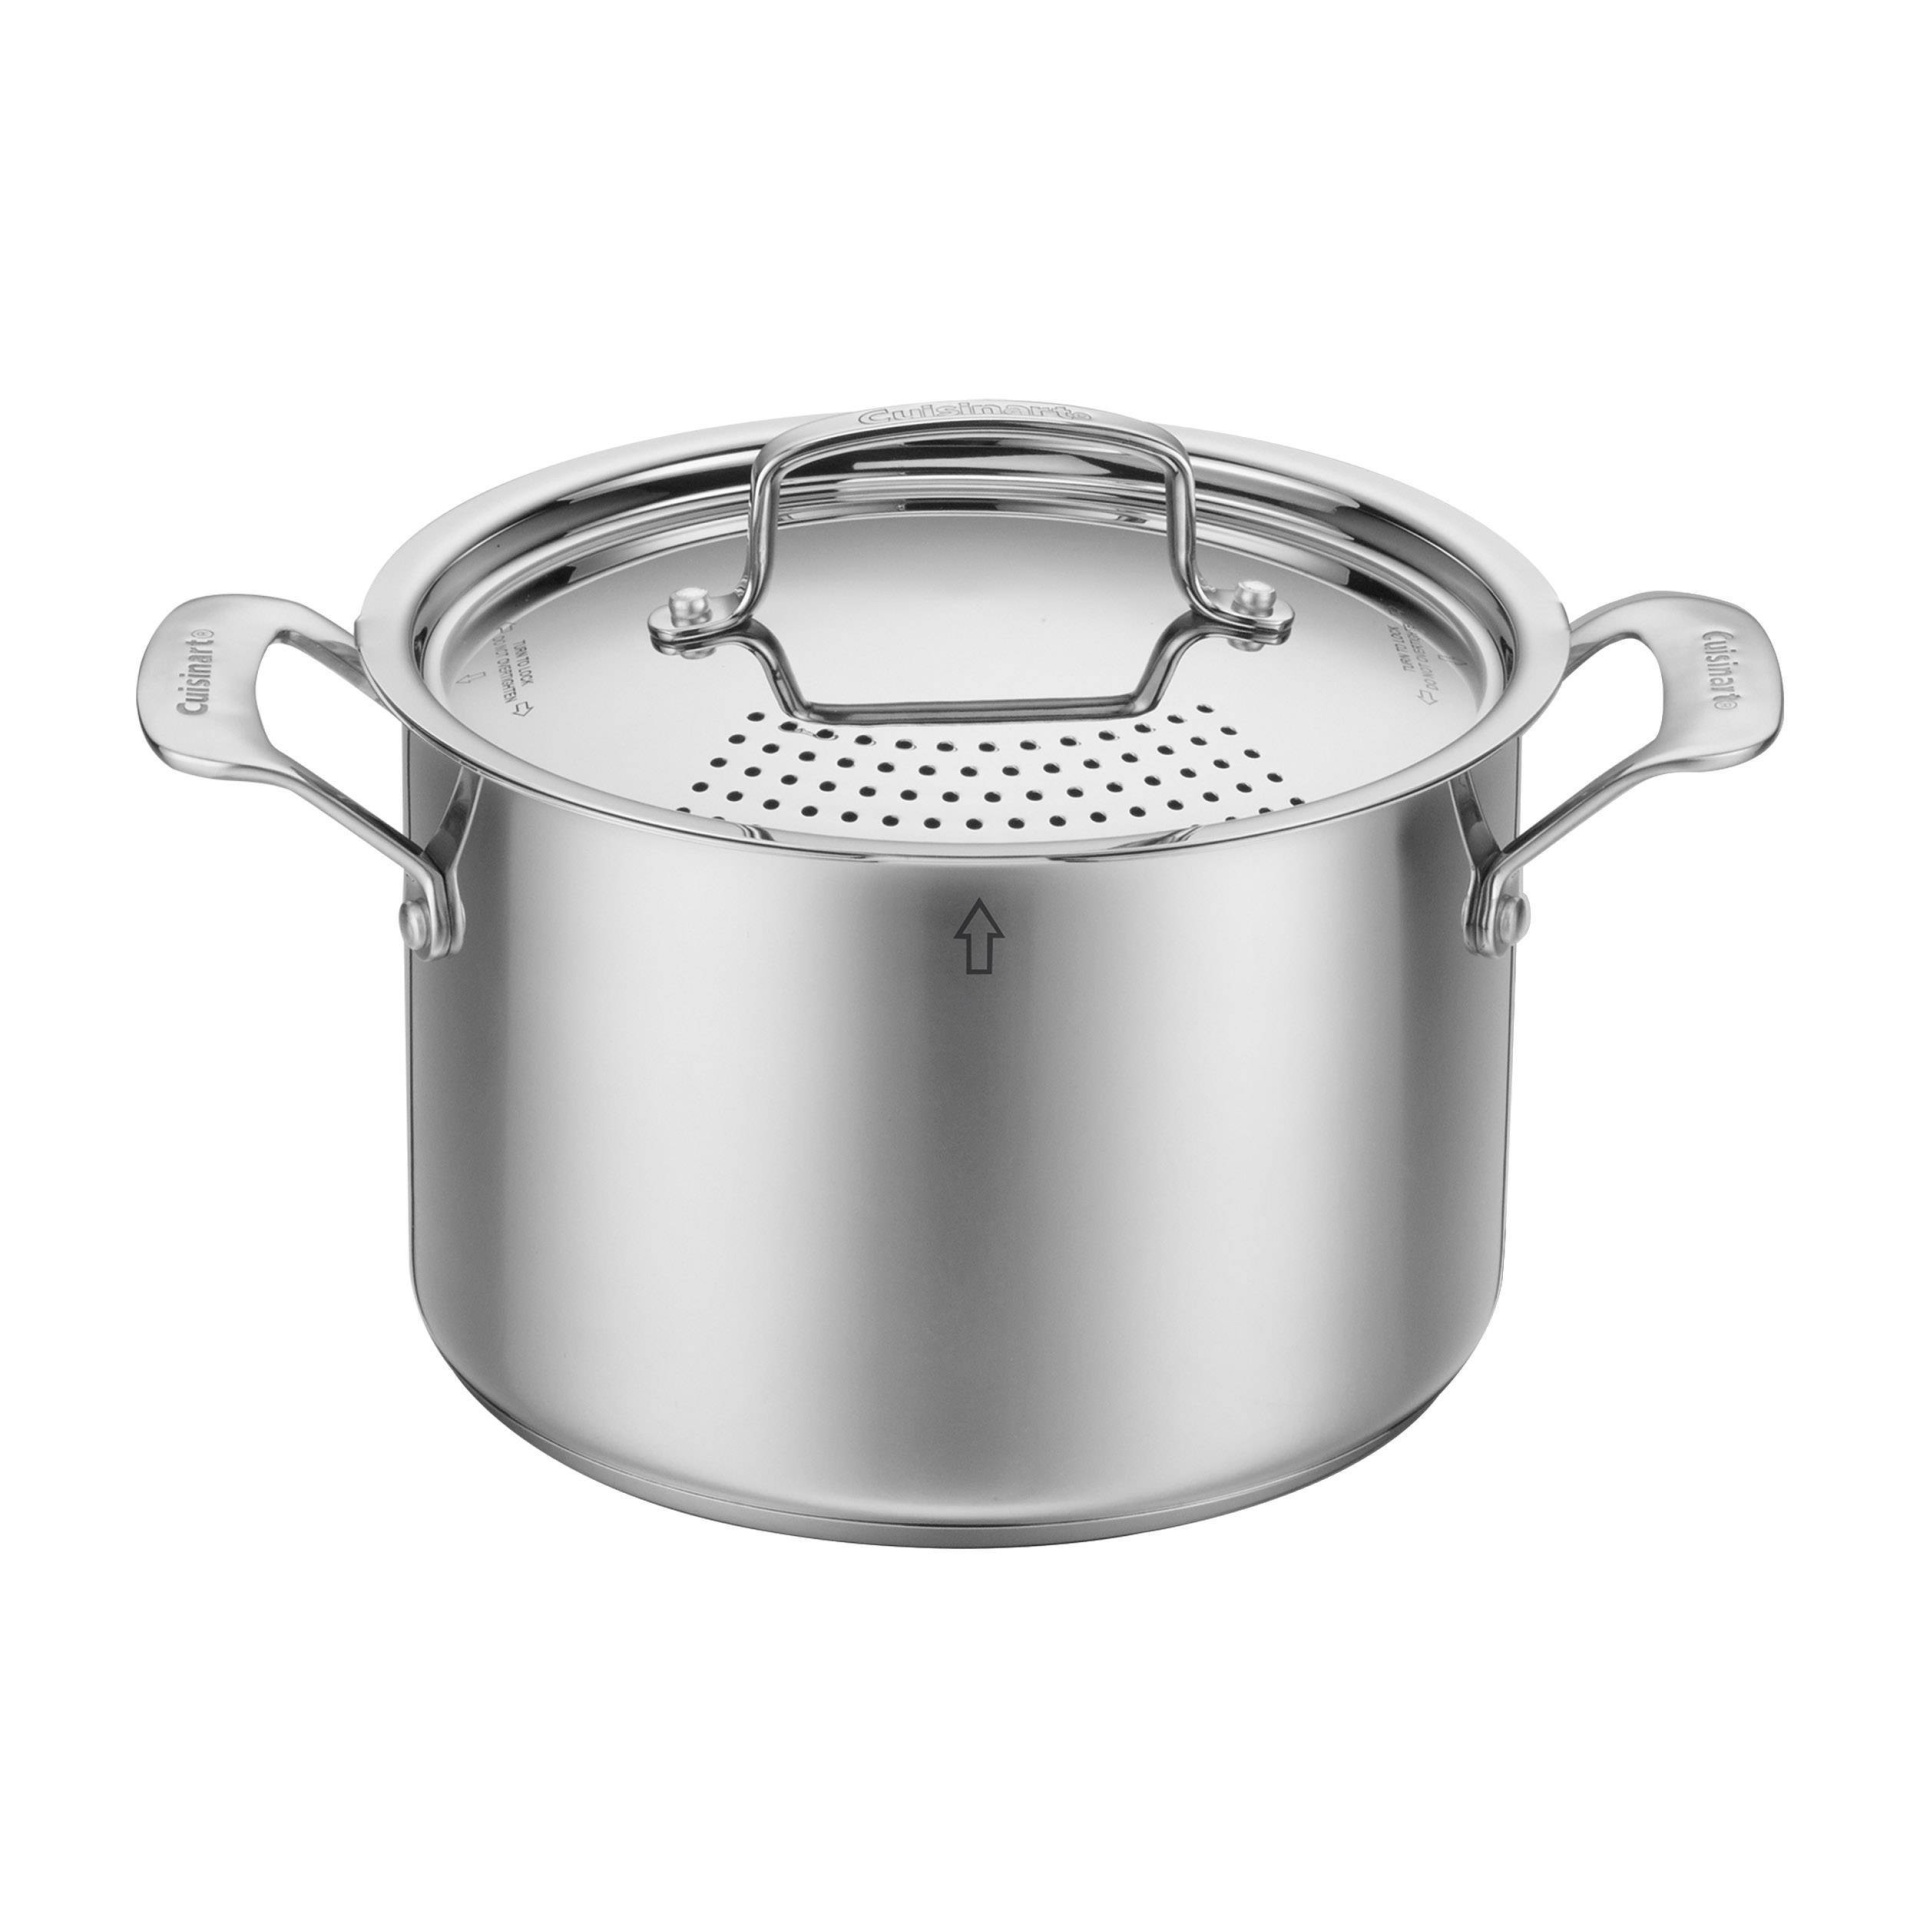 slide 1 of 6, Cuisinart 5.75qt Stainless Steel Pasta Pot with Straining Cover - 83665S-22, 5.75 qt